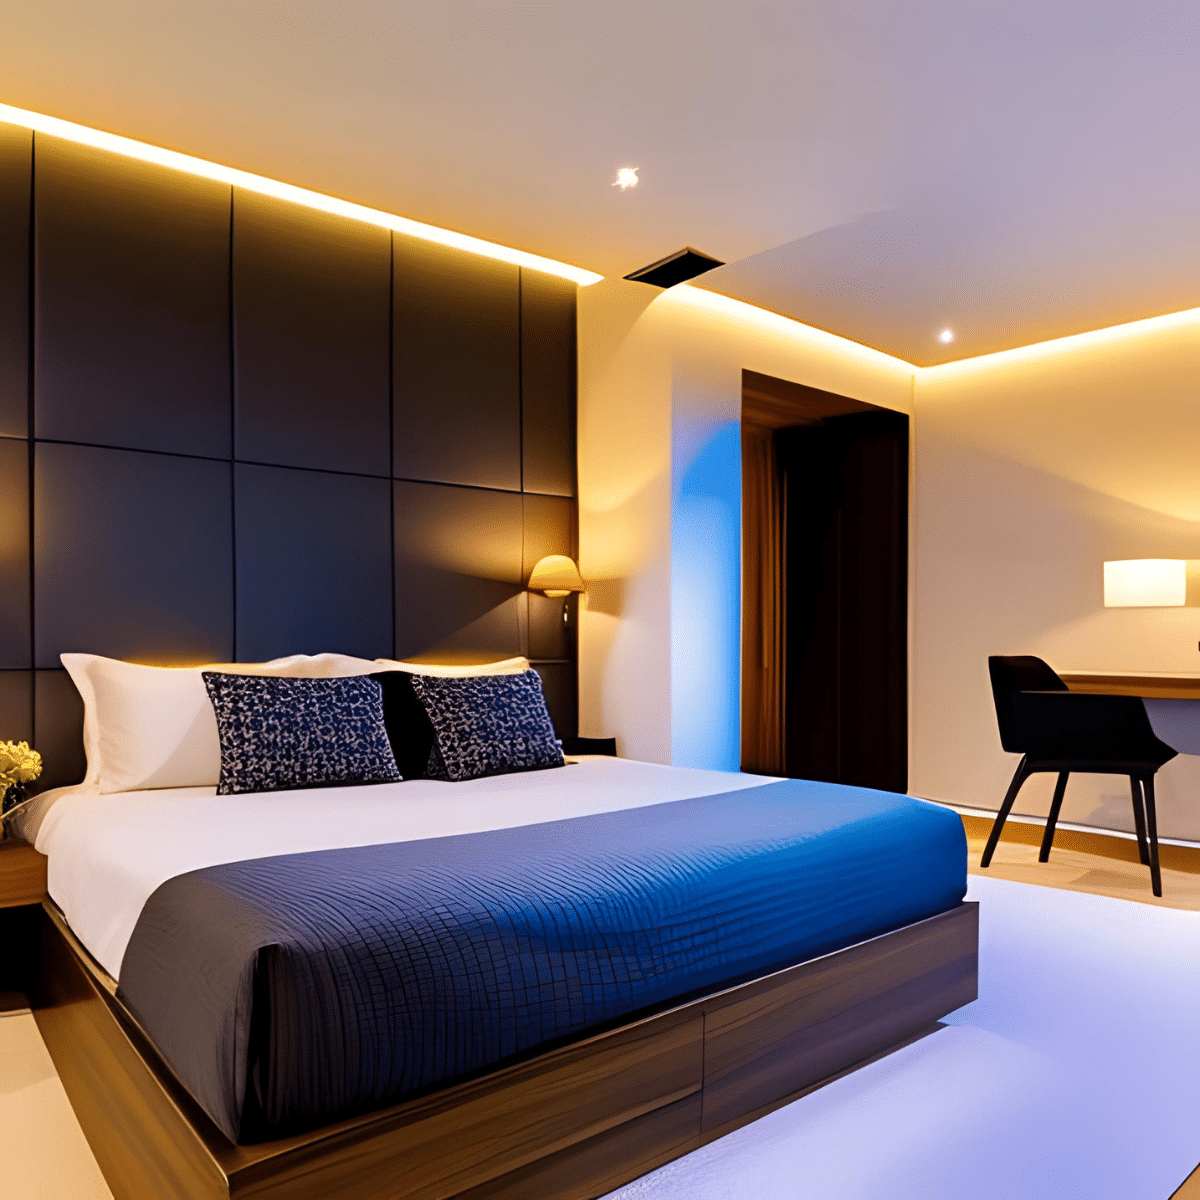 bedroom with a neatly made bed, wall lights, ceiling backlight, ceiling lights, and a bedside lamp